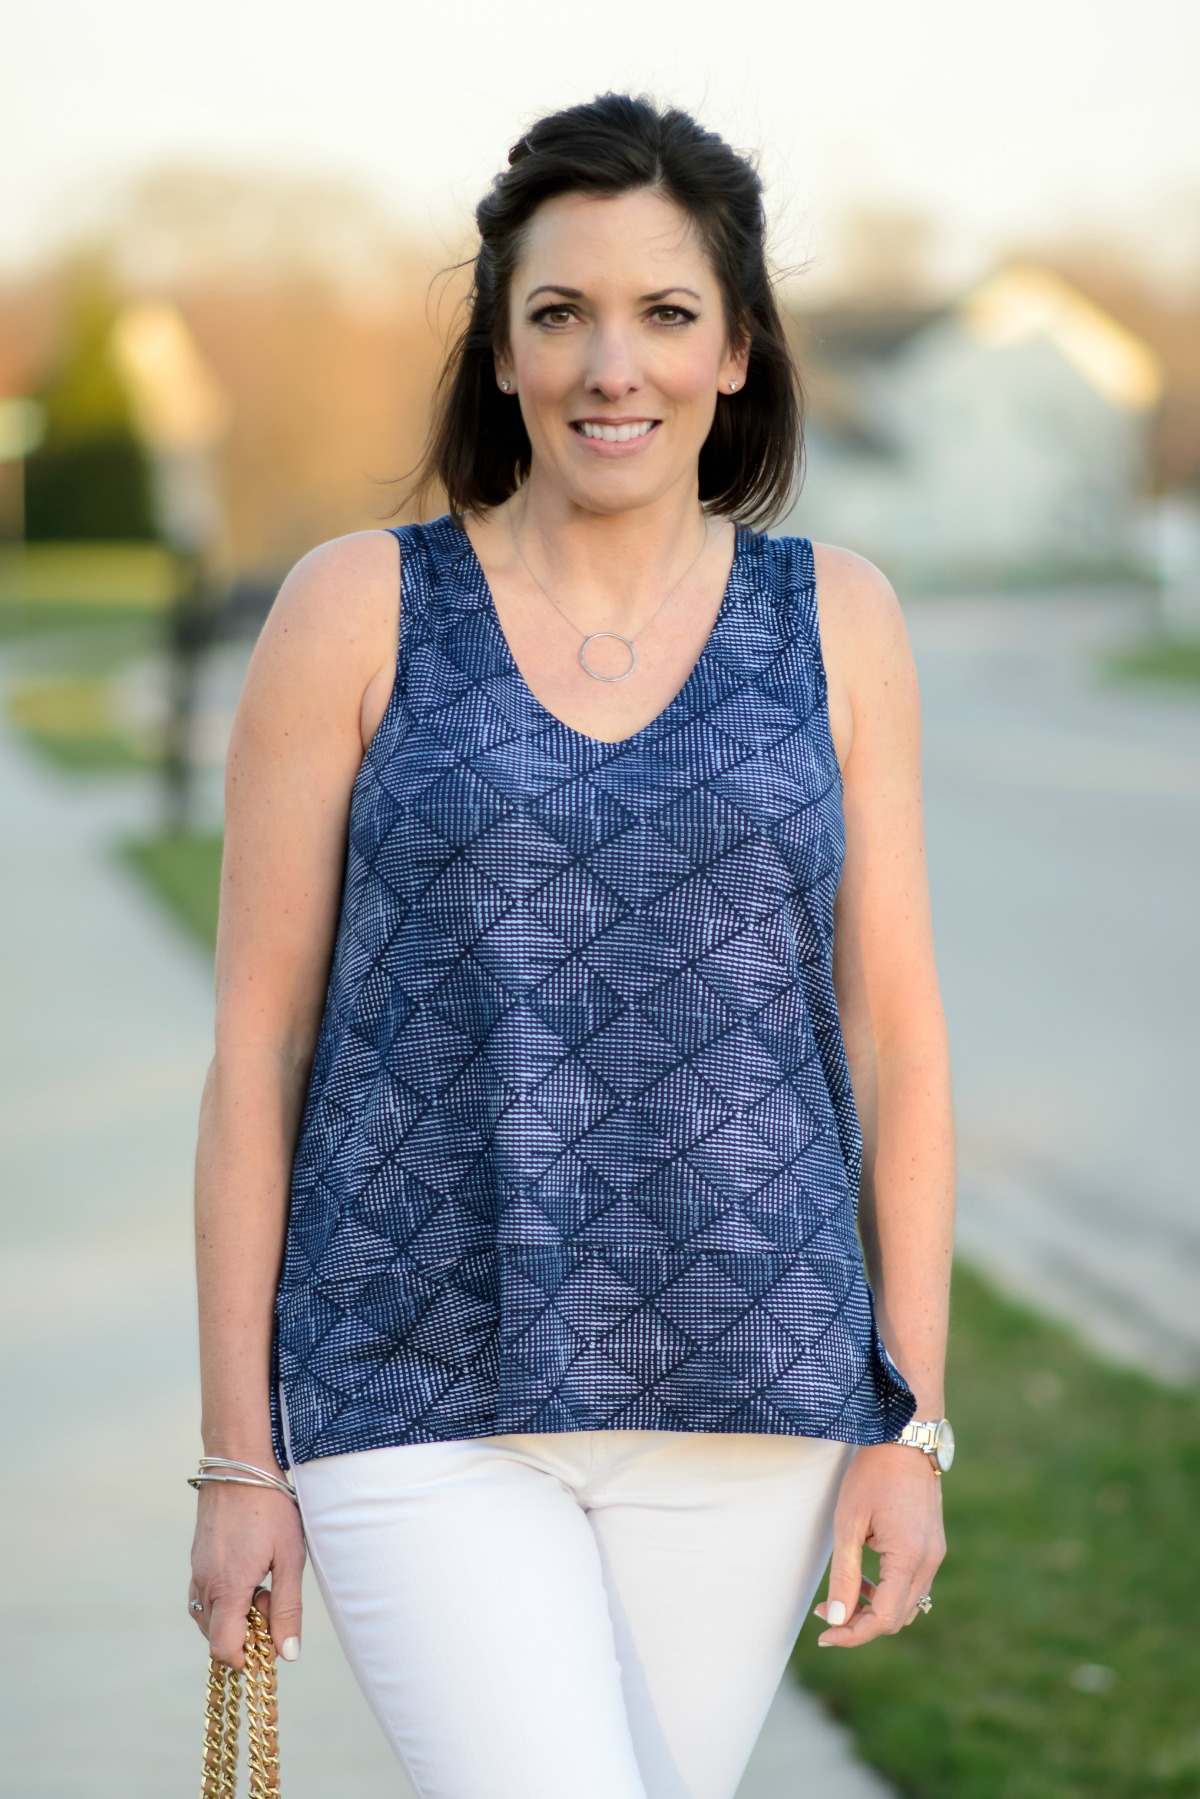 Loving this easy breezy relaxed split hem printed top from @oldnavy this spring! Throw it on with white jeans and your favorite neutral sandals for an easy daytime look. 